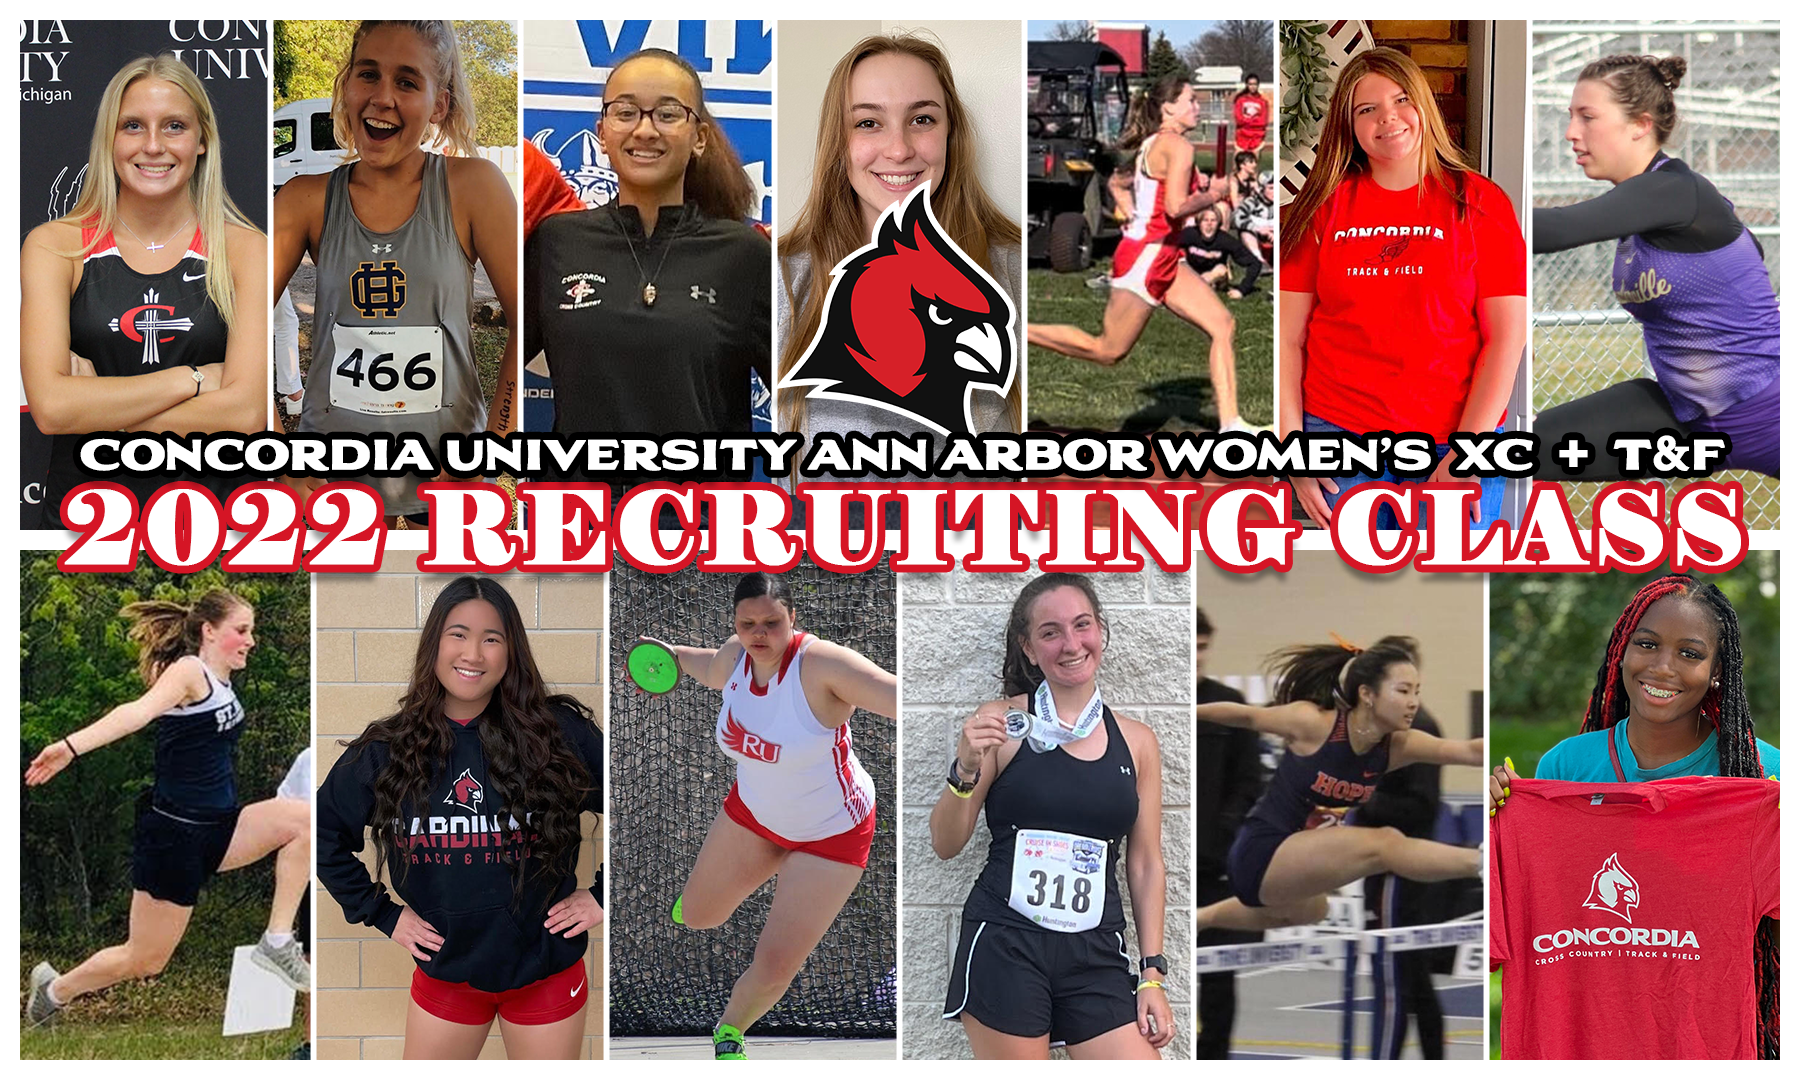 Cross Country and Track & Field Announce 2022-23 Women’s Recruiting Class